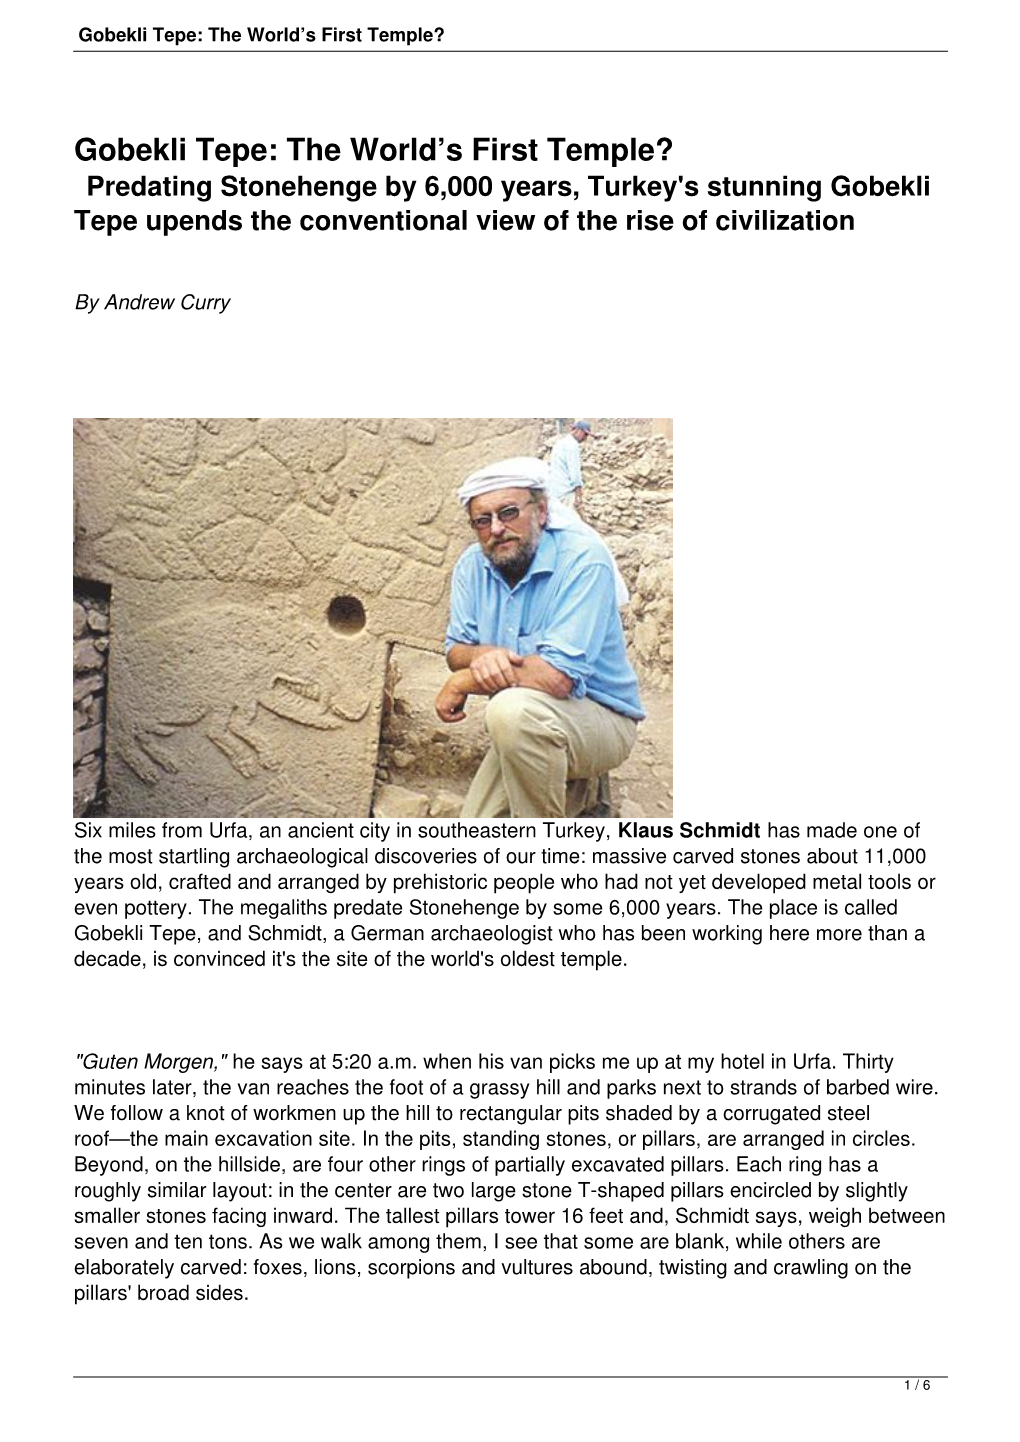 Gobekli Tepe: the World's First Temple?